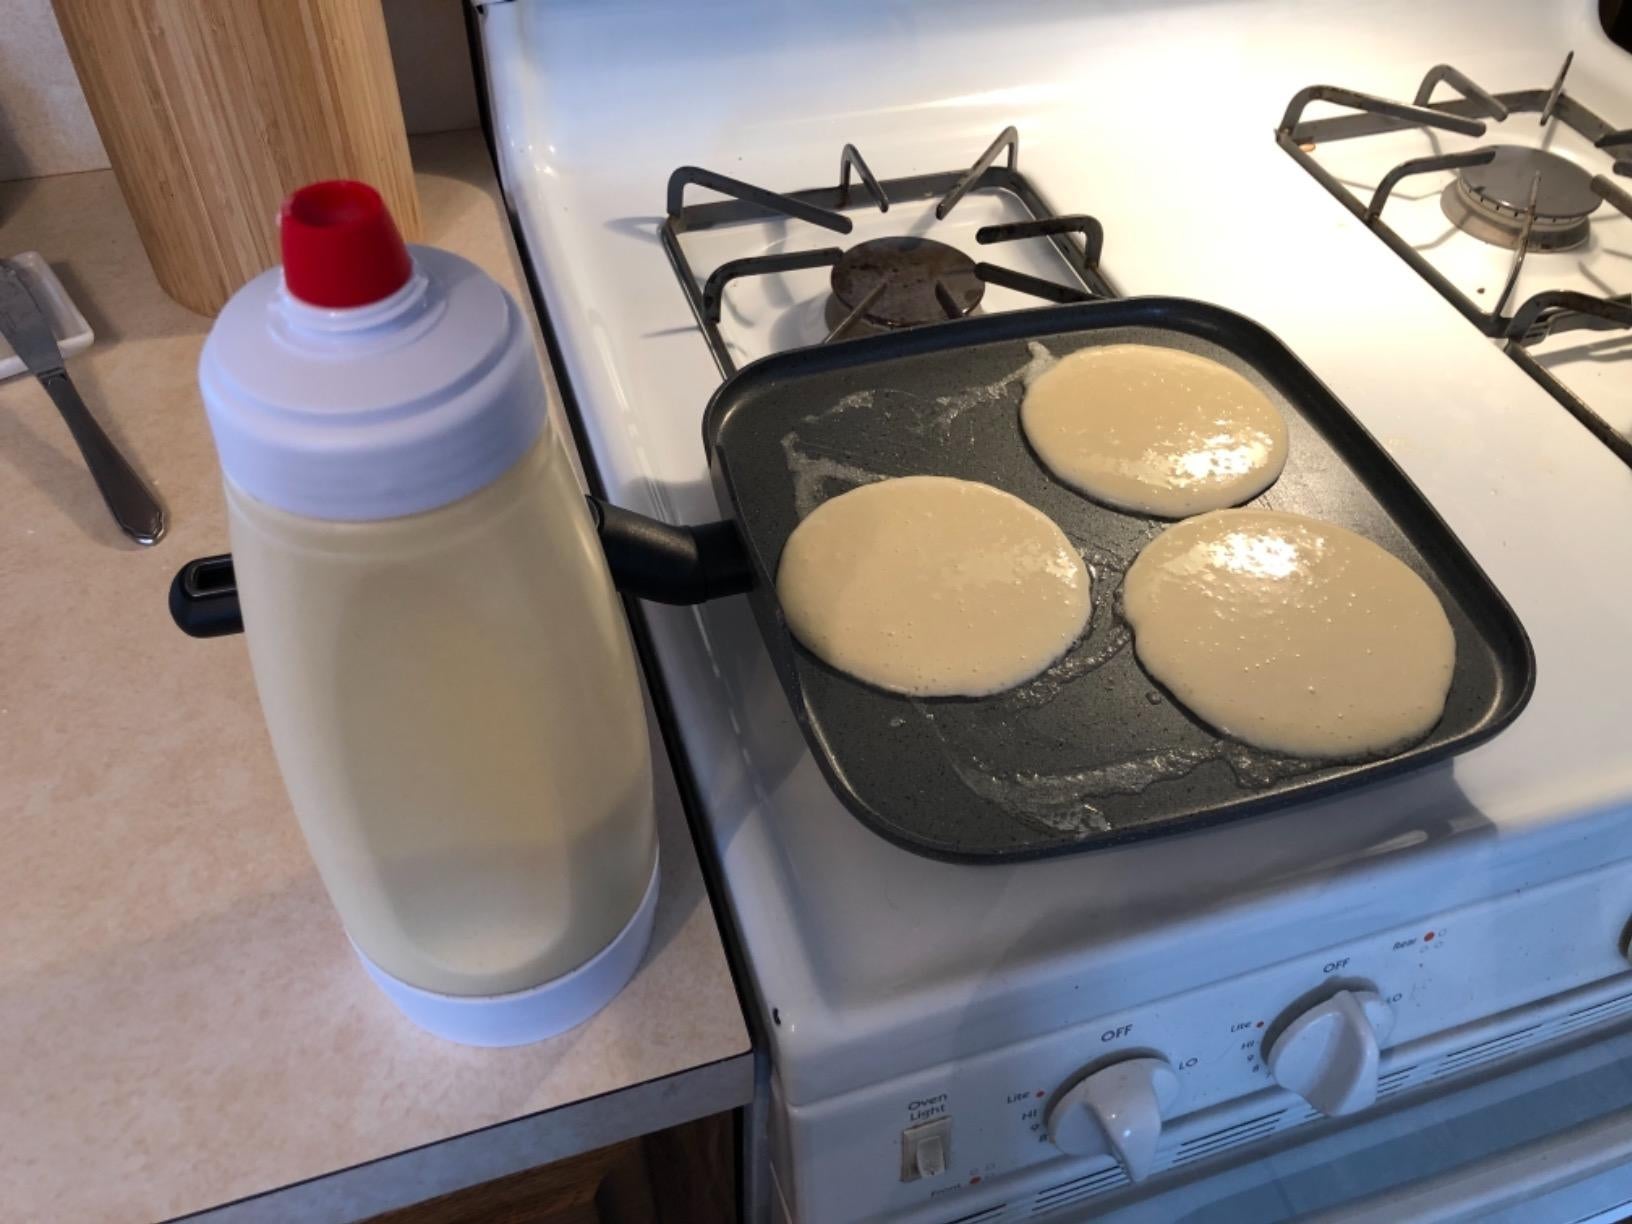 Reviewer's image of dispenser with pancakes cooking on grill